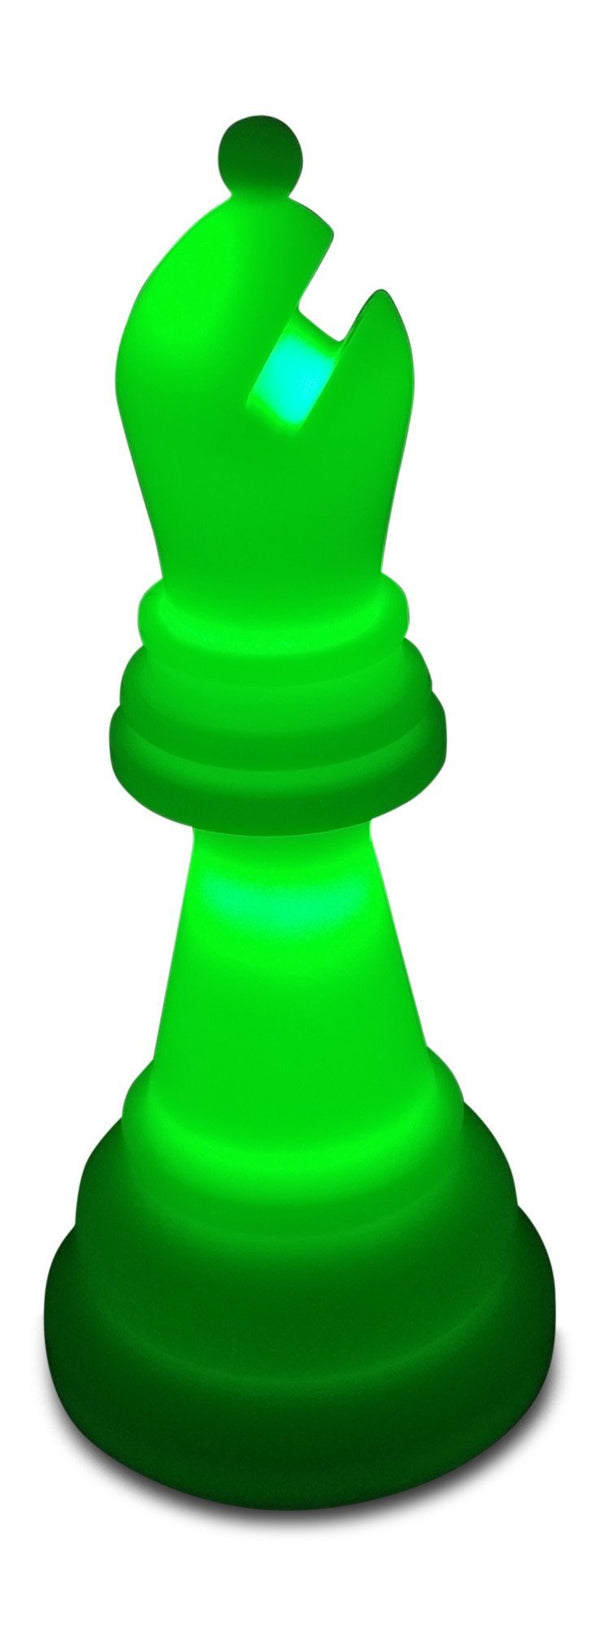 MegaChess 28 Inch Perfect Bishop Light-Up Giant Chess Piece - Green | Default Title | MegaChess.com